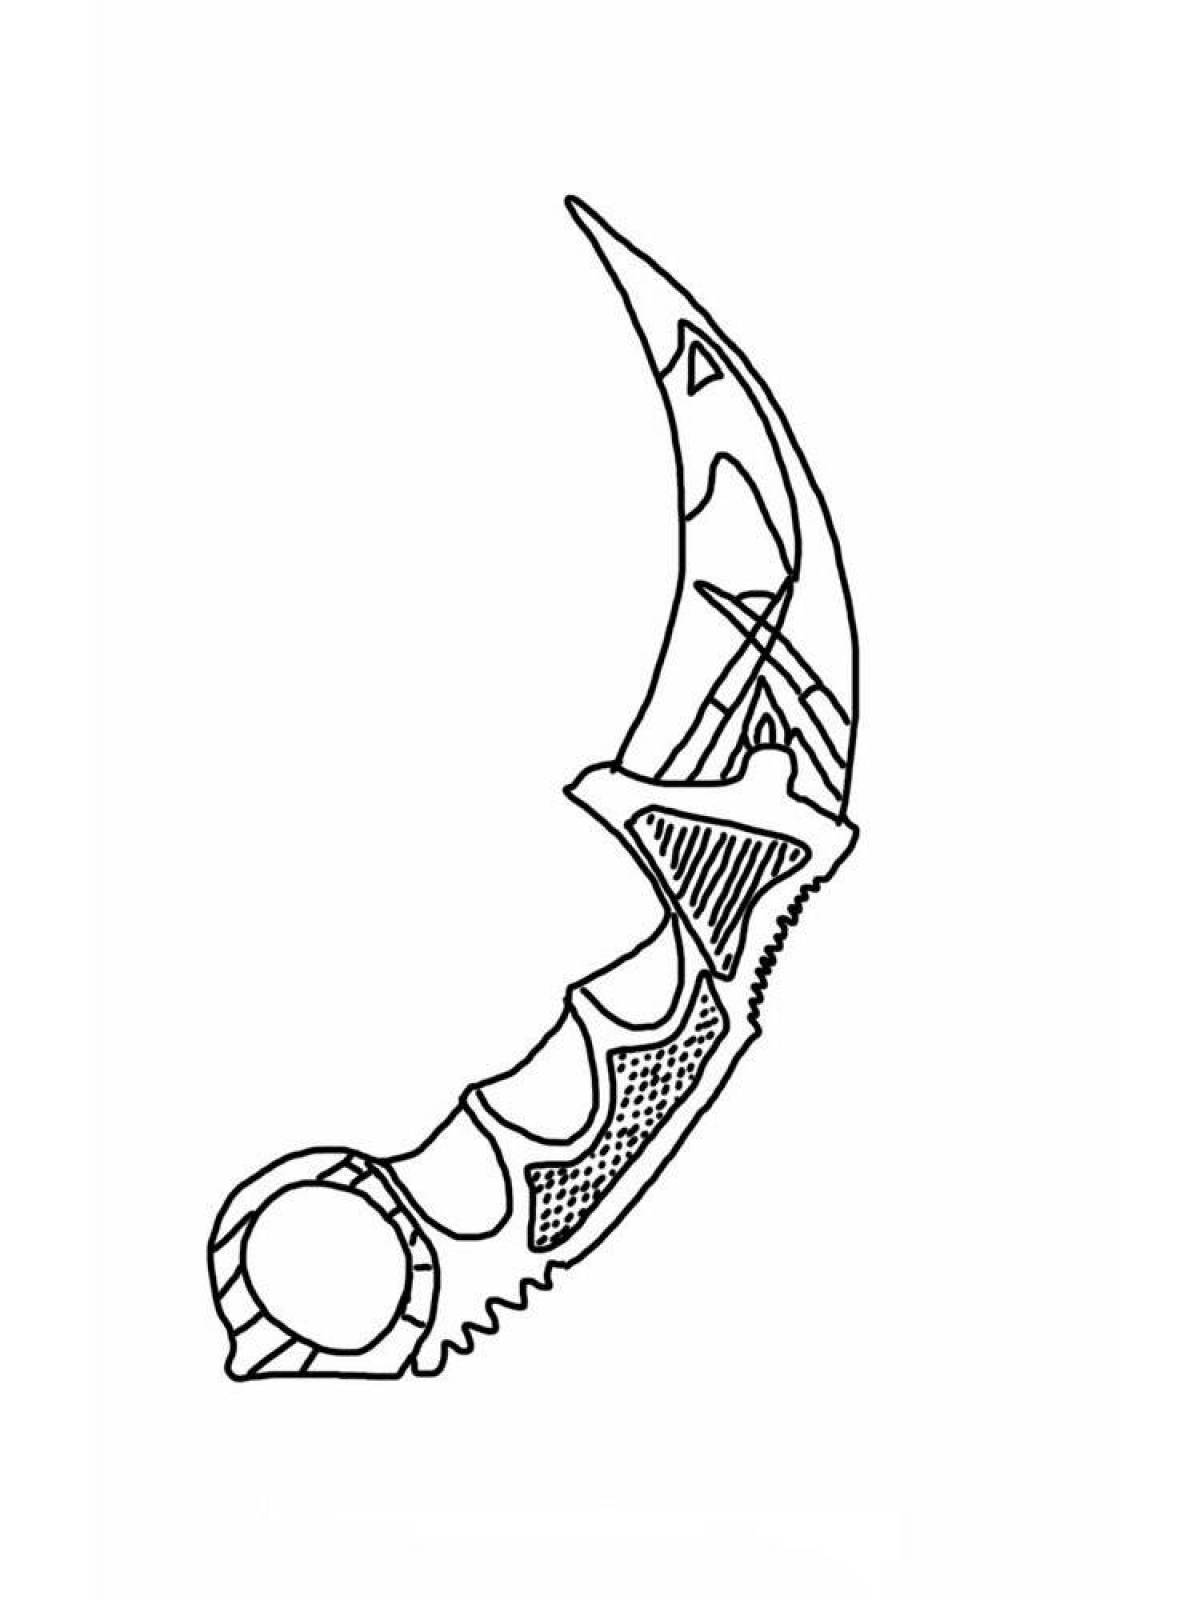 Beautiful standoff 2 knives coloring page